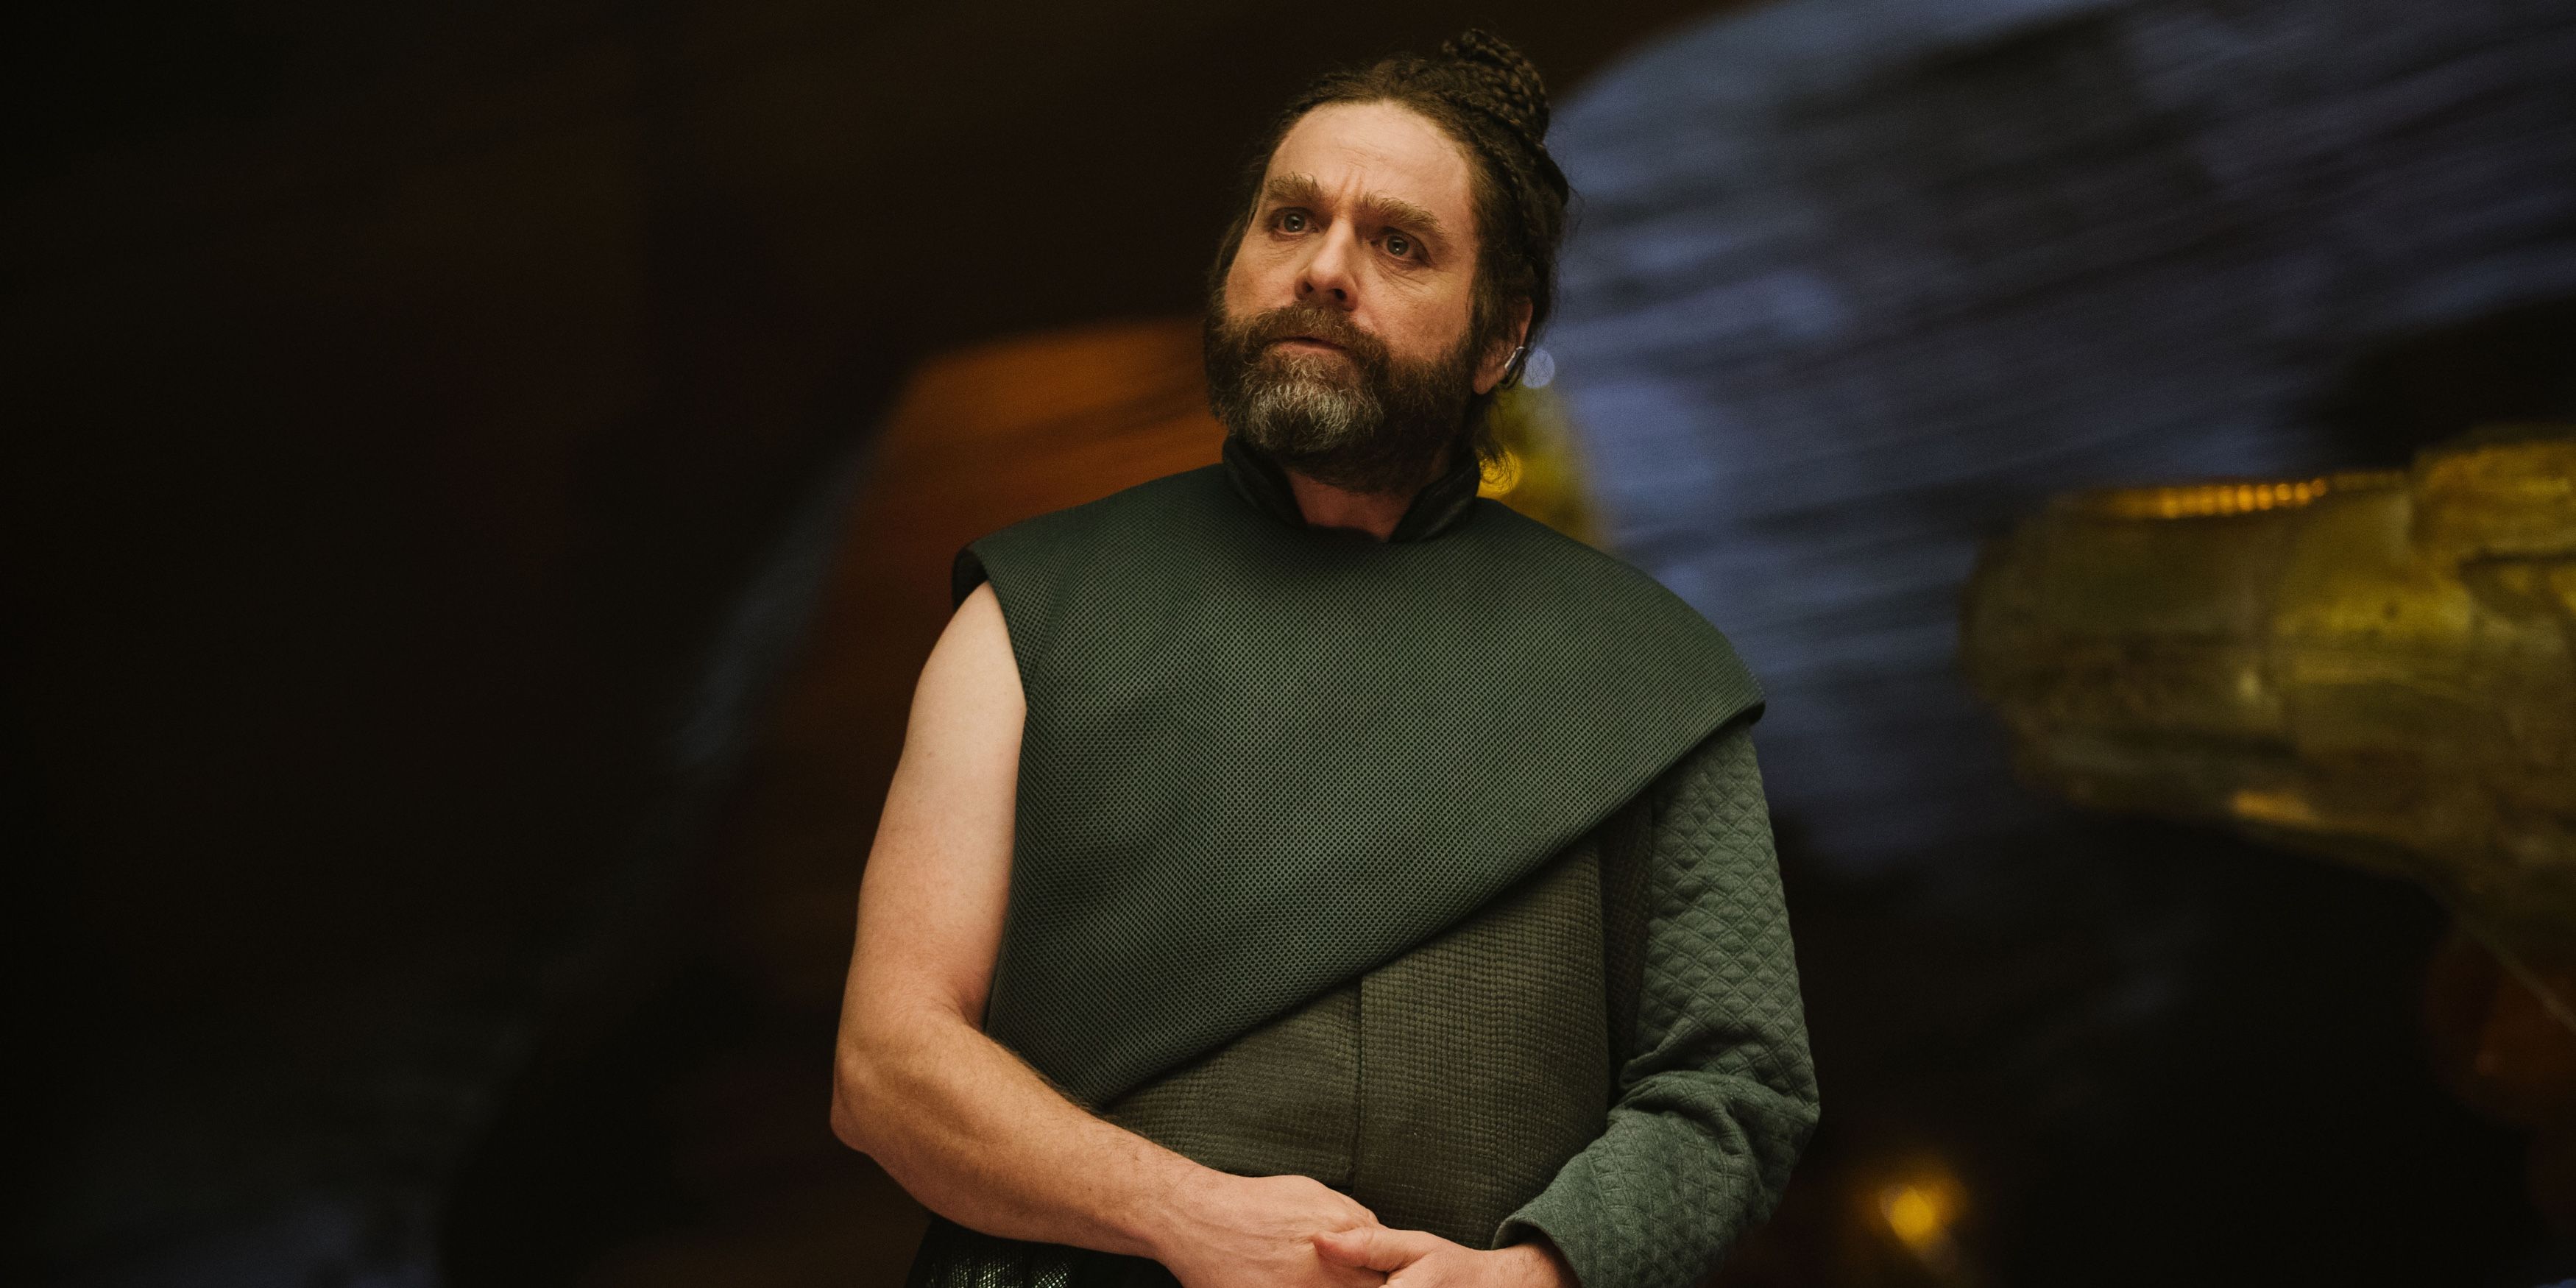 Zach Galifianakis Interview A Wrinkle In Time ScreenRant